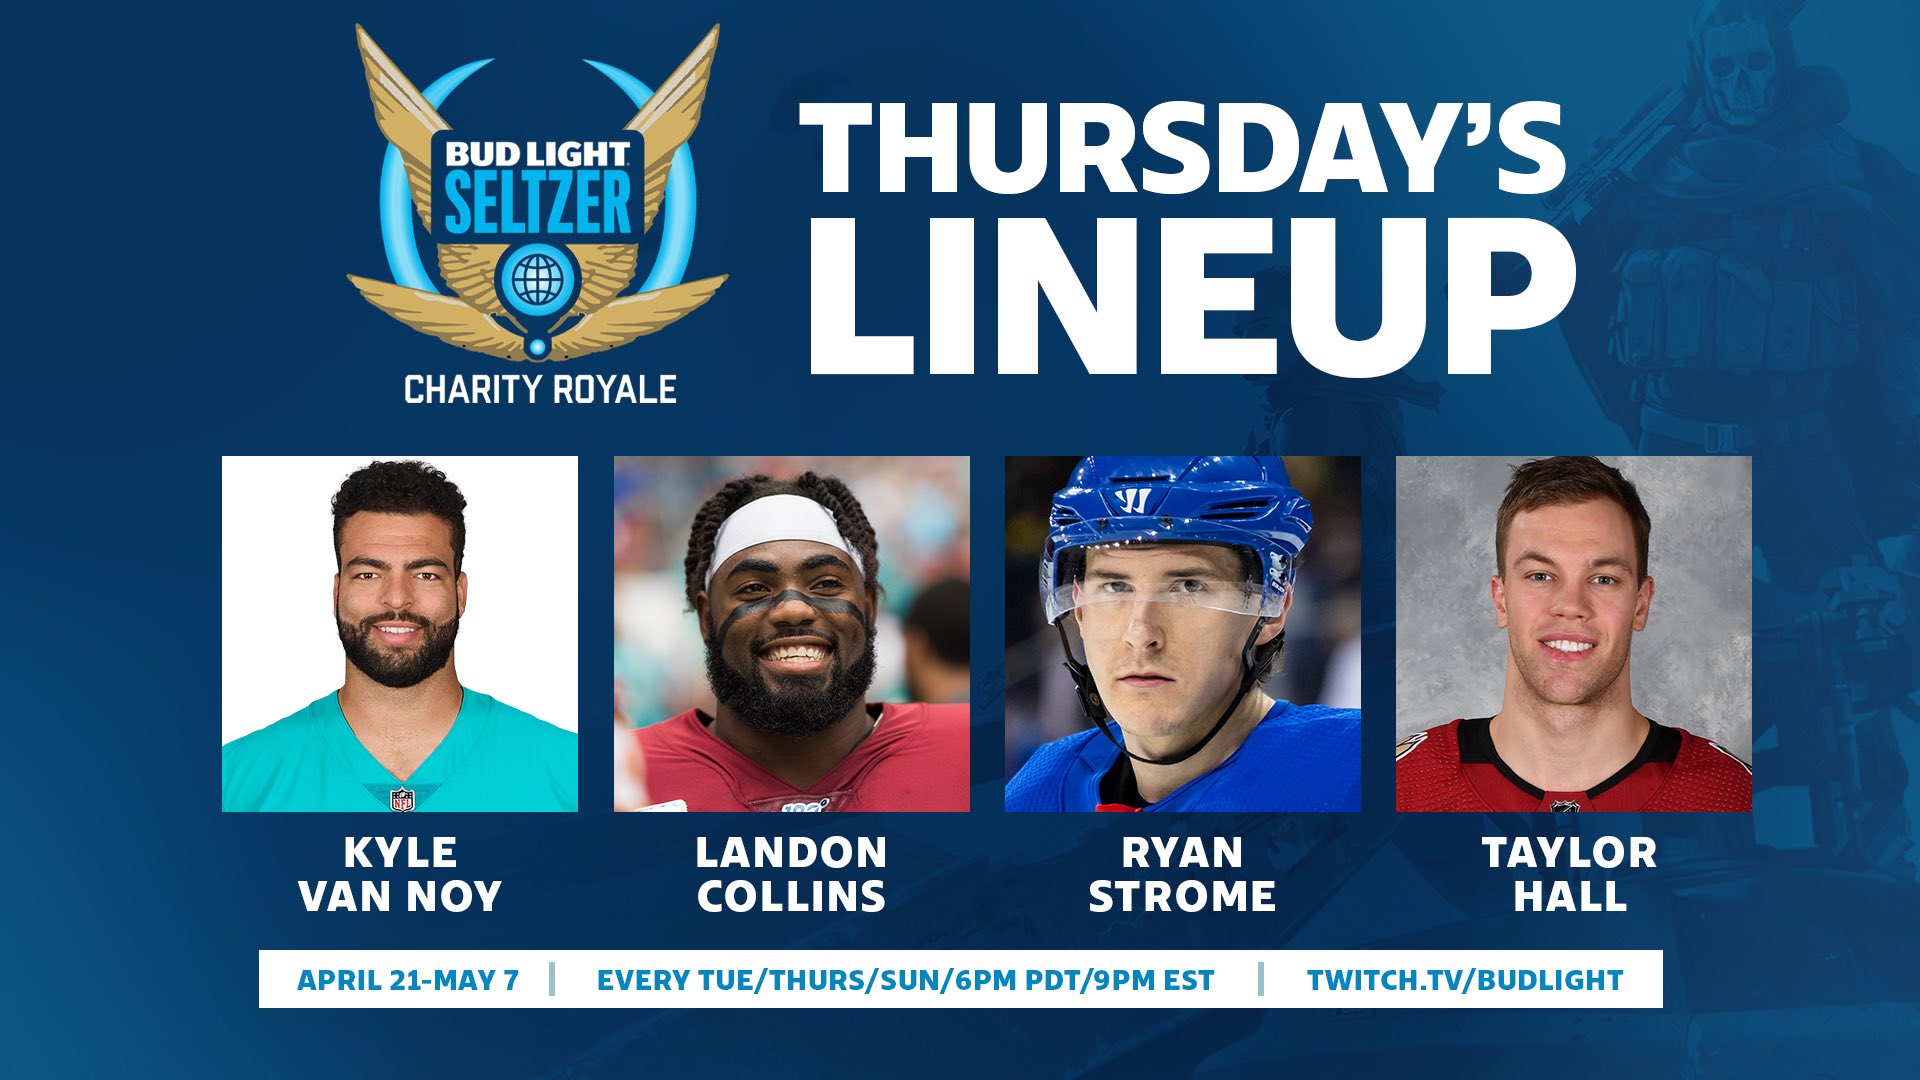 berolige ydre opbevaring Twitch Esports on Twitter: "The action rolls on in the @BudLight Seltzer  Charity Royale Tournament! @KVN_03 @TheHumble_21 @strome18 &amp; @hallsy09  drop in to Call of Duty: Warzone to raise money for charities